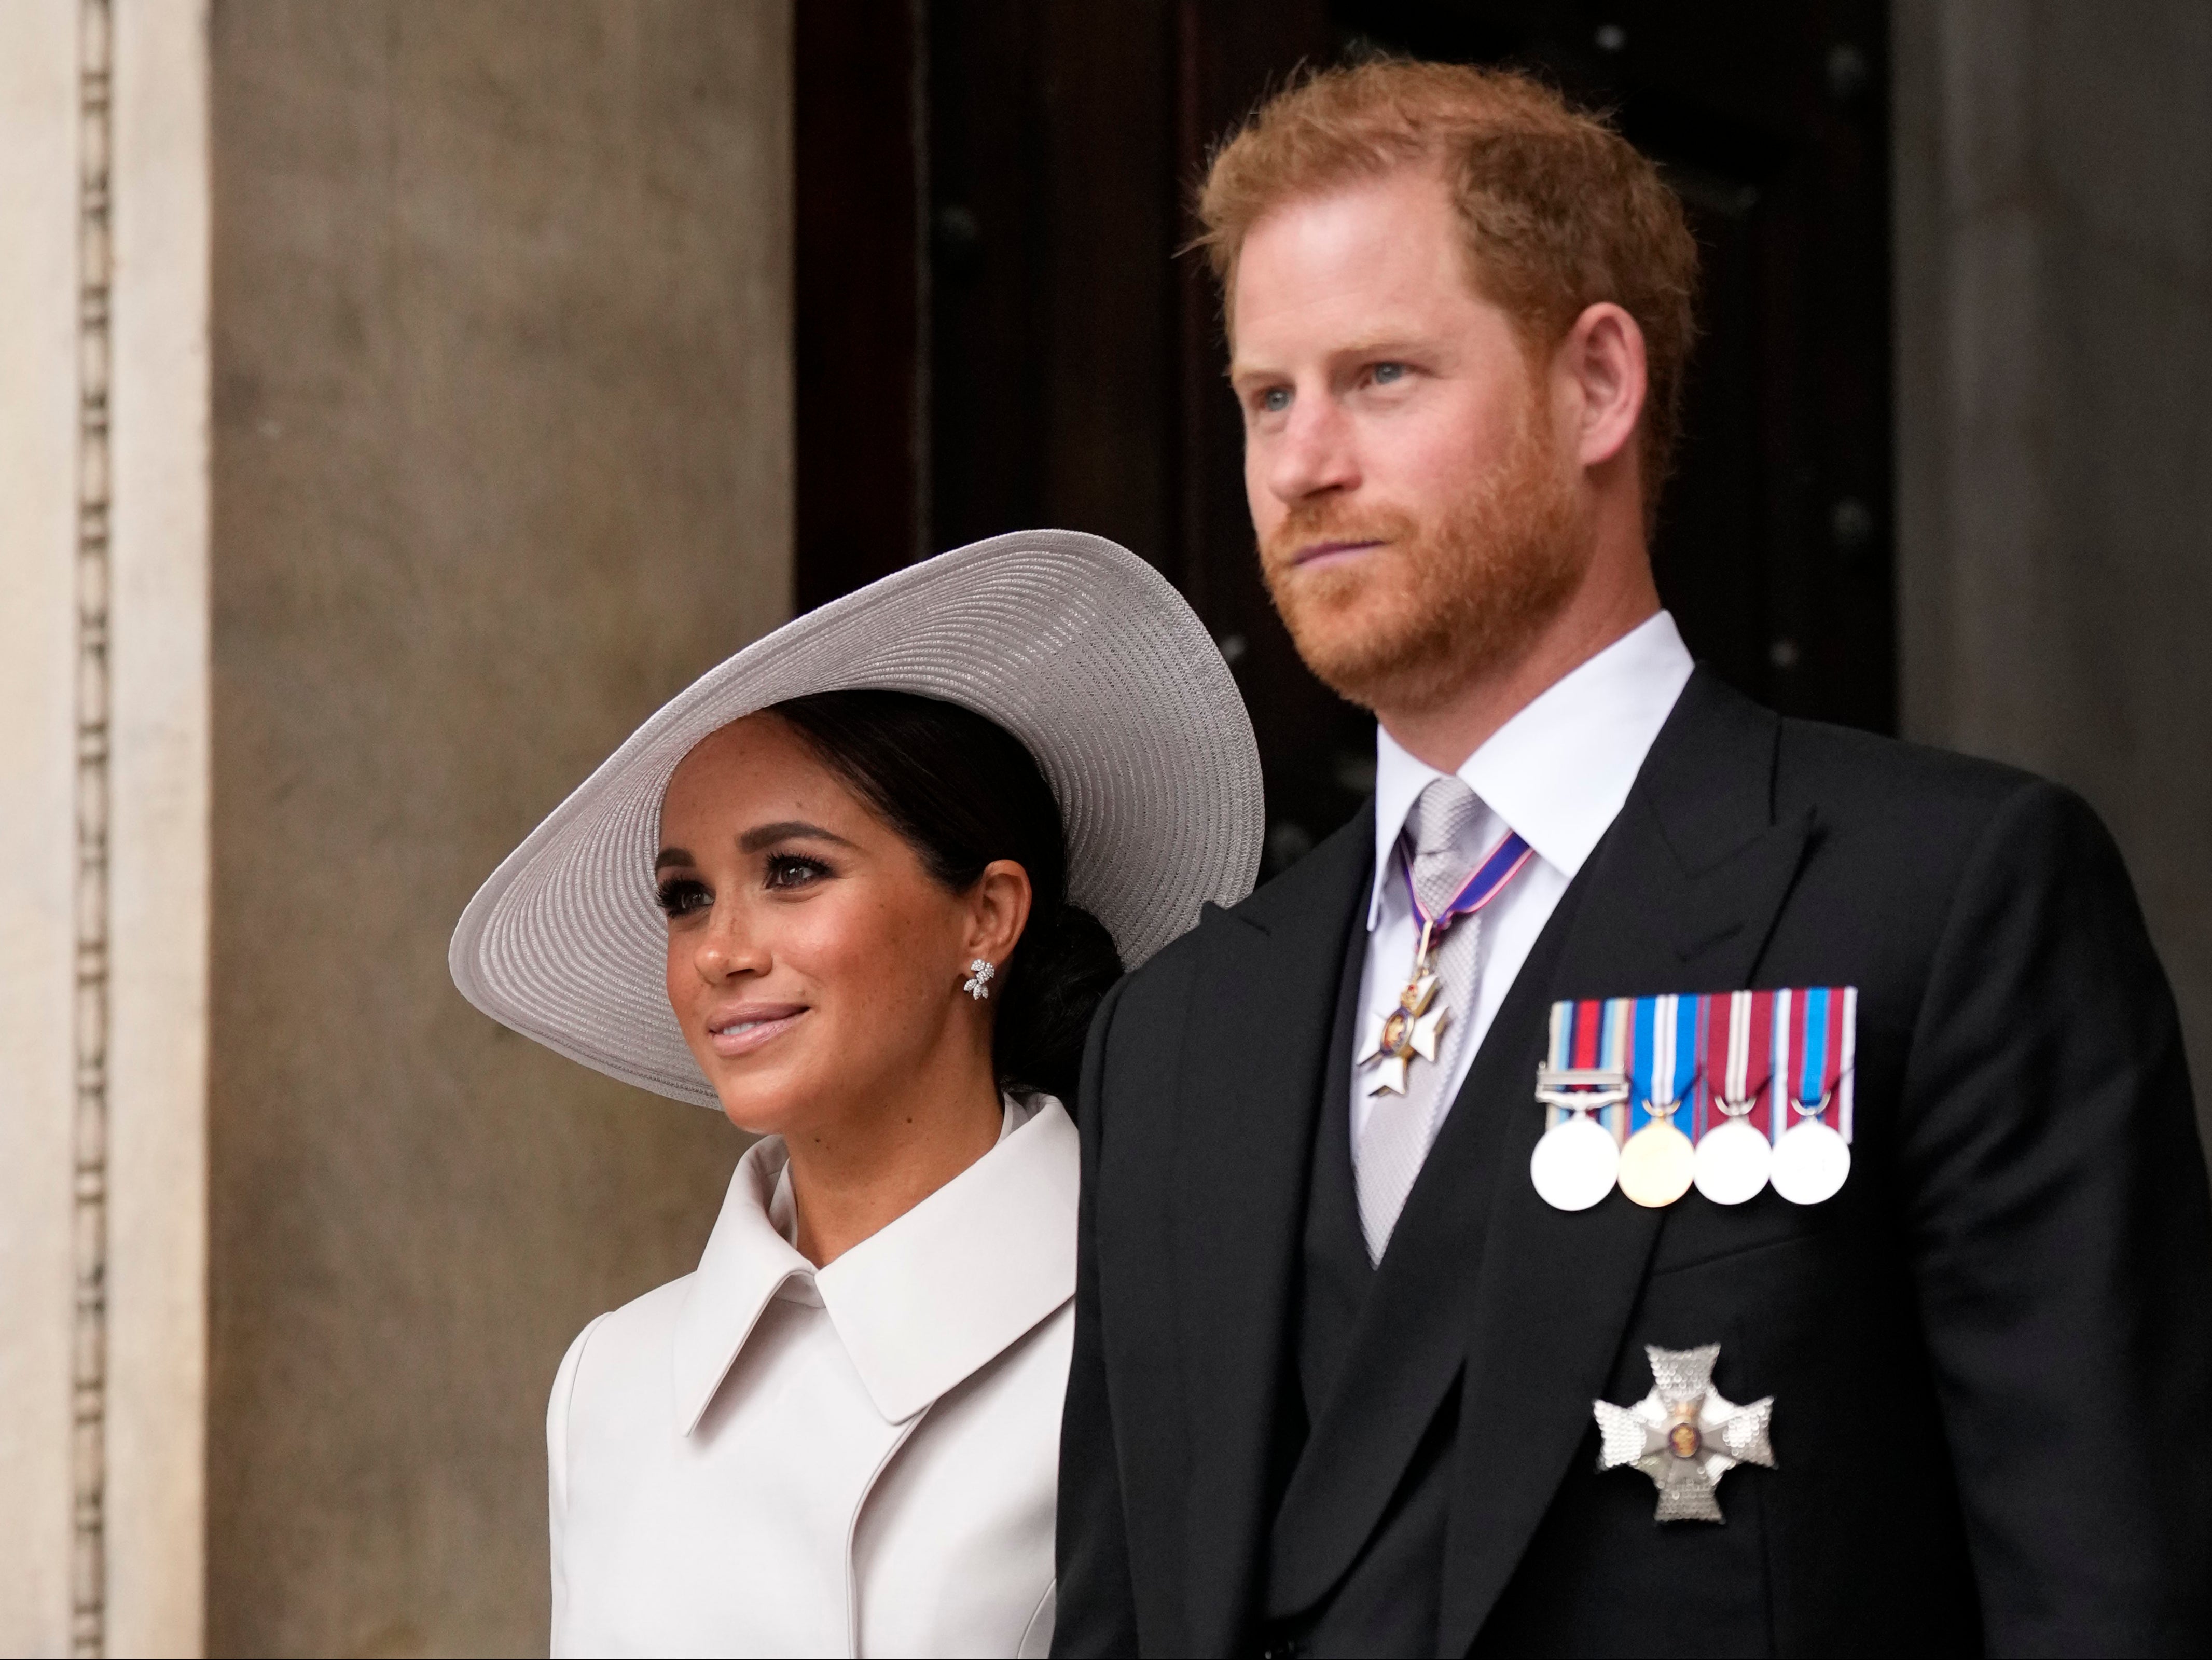 Harry and Meghan during the Queen’s Platinum Jubilee celebrations